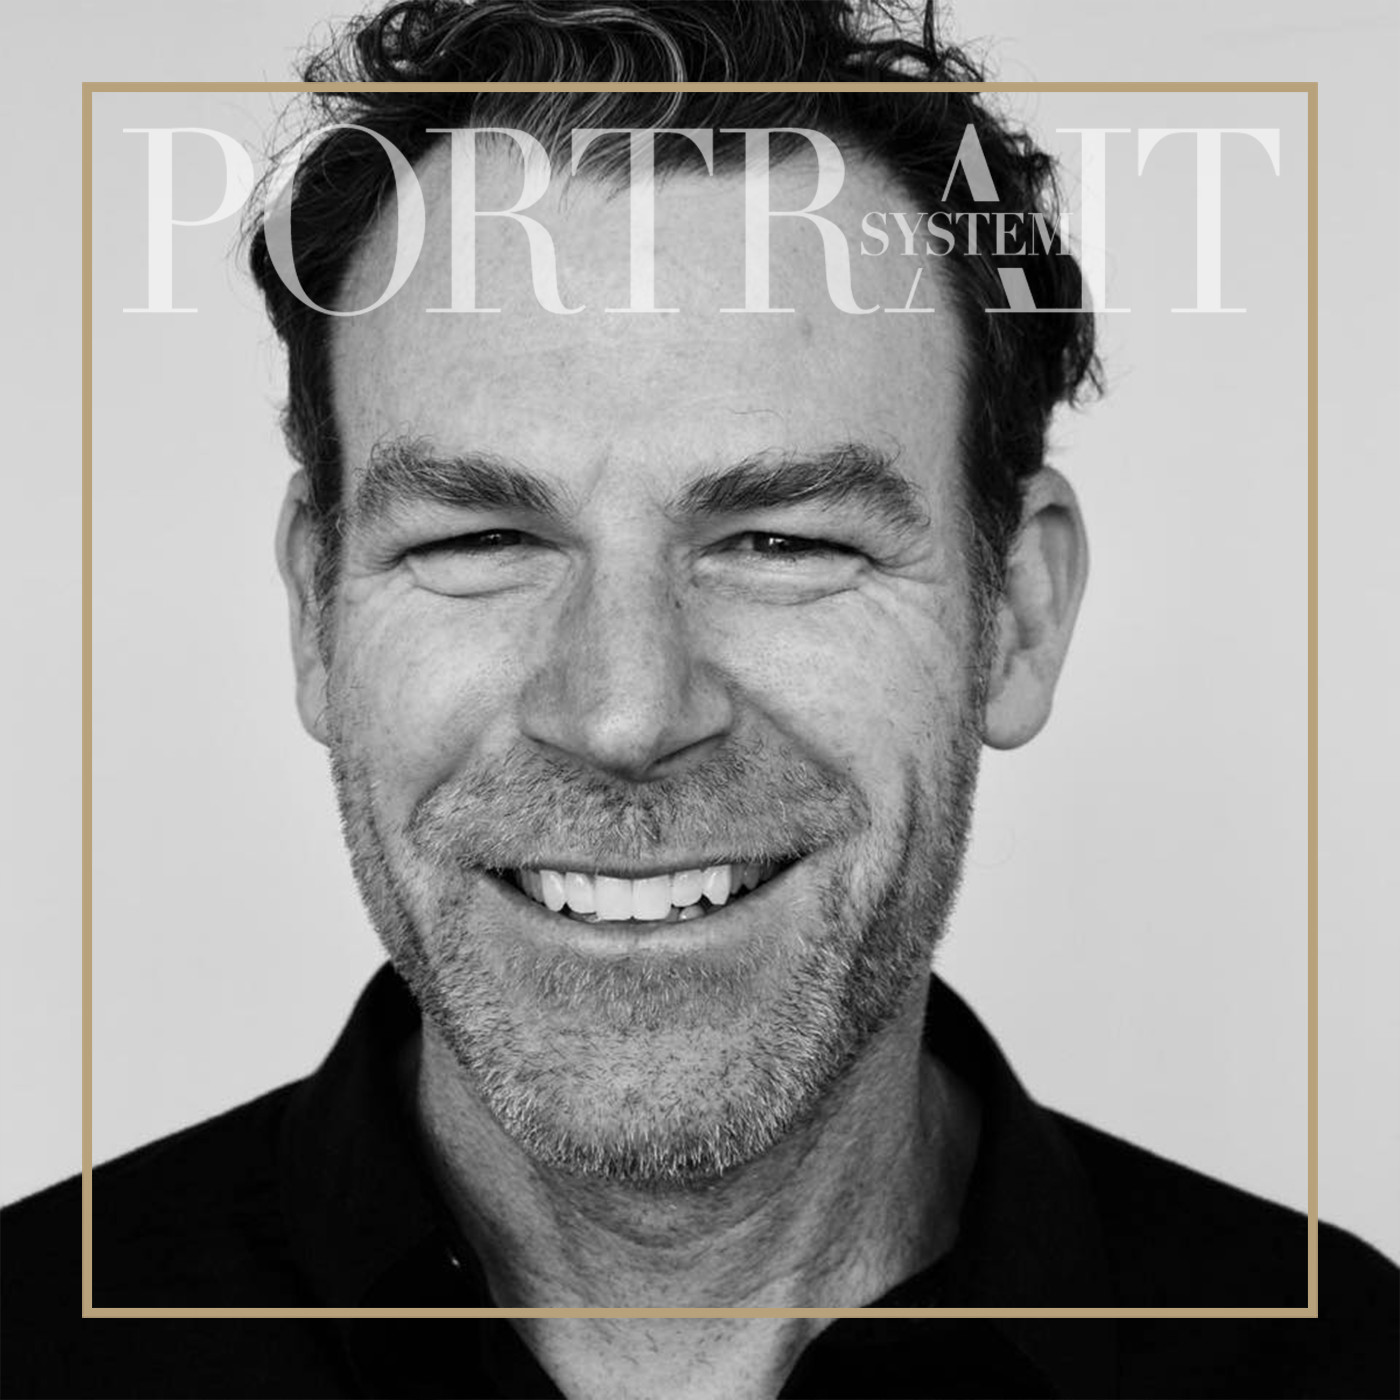 180 Loser: How Athlete, Model and Photographer Peter Hurley Failed Upward